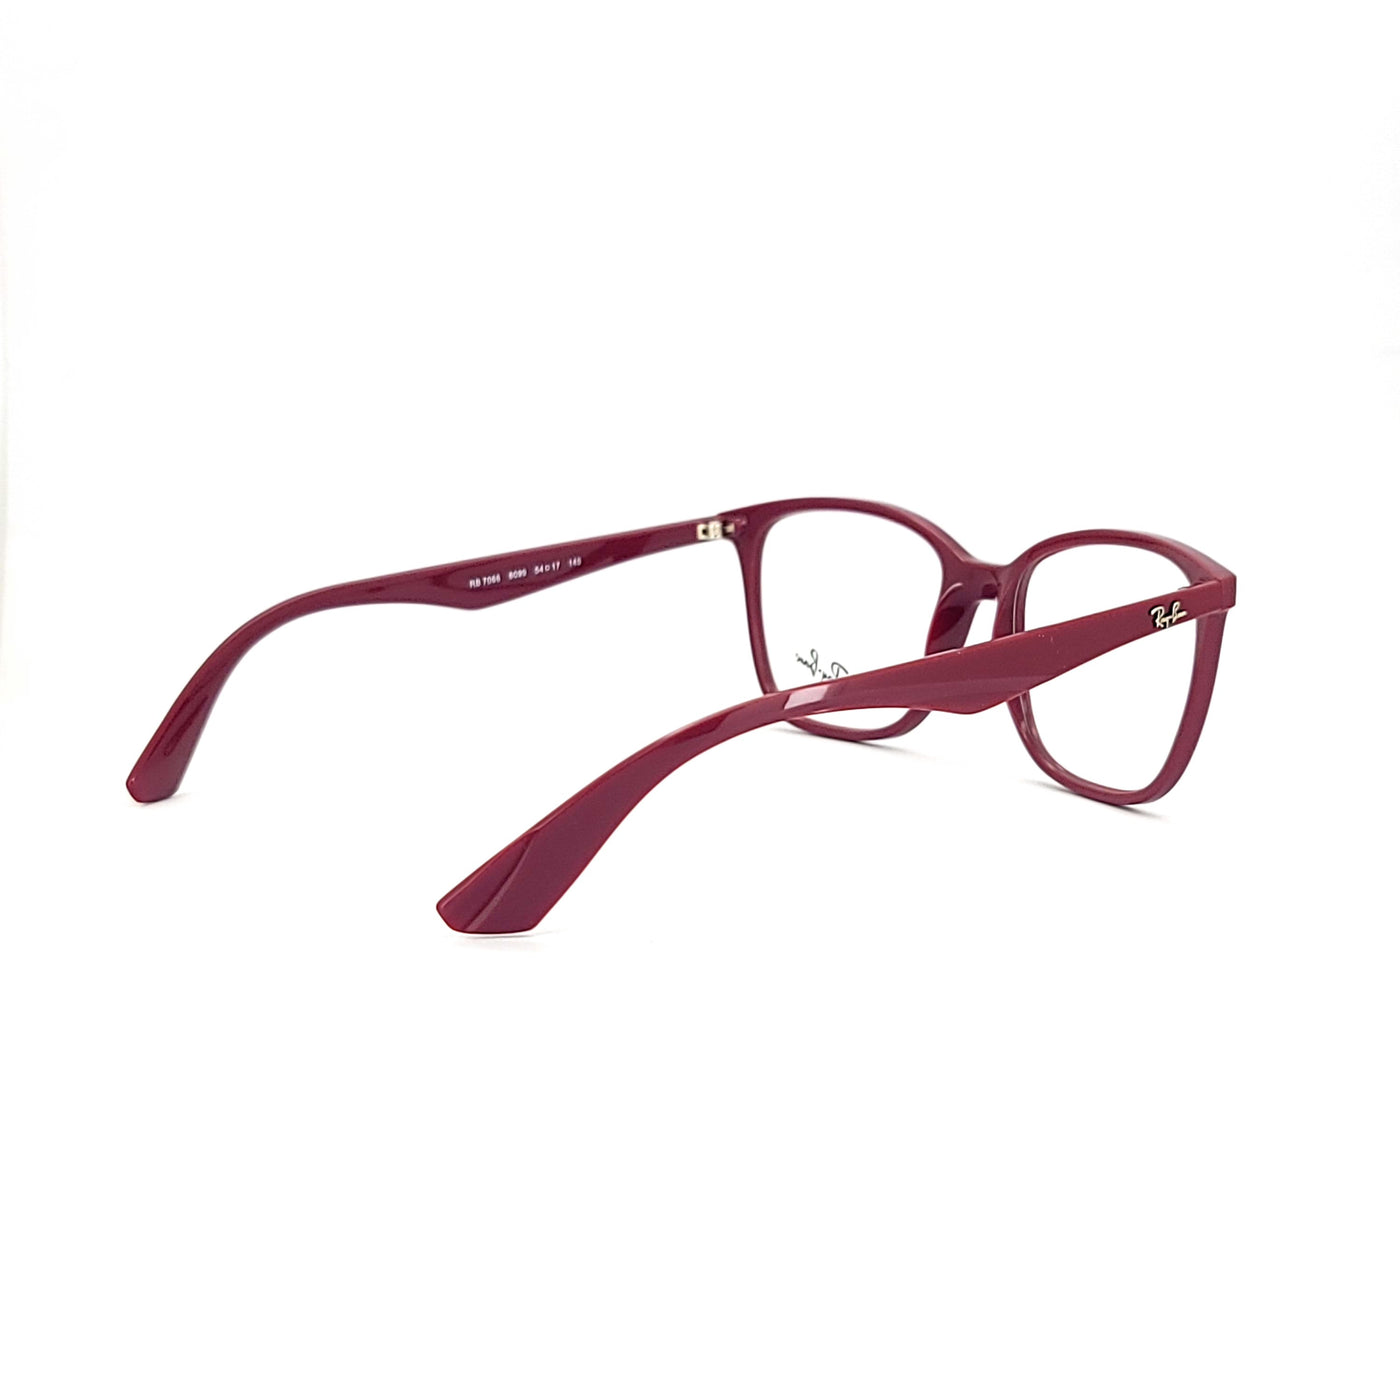 Ray-Ban Highstreet RB7066/8099_54 | Eyeglasses - Vision Express Optical Philippines